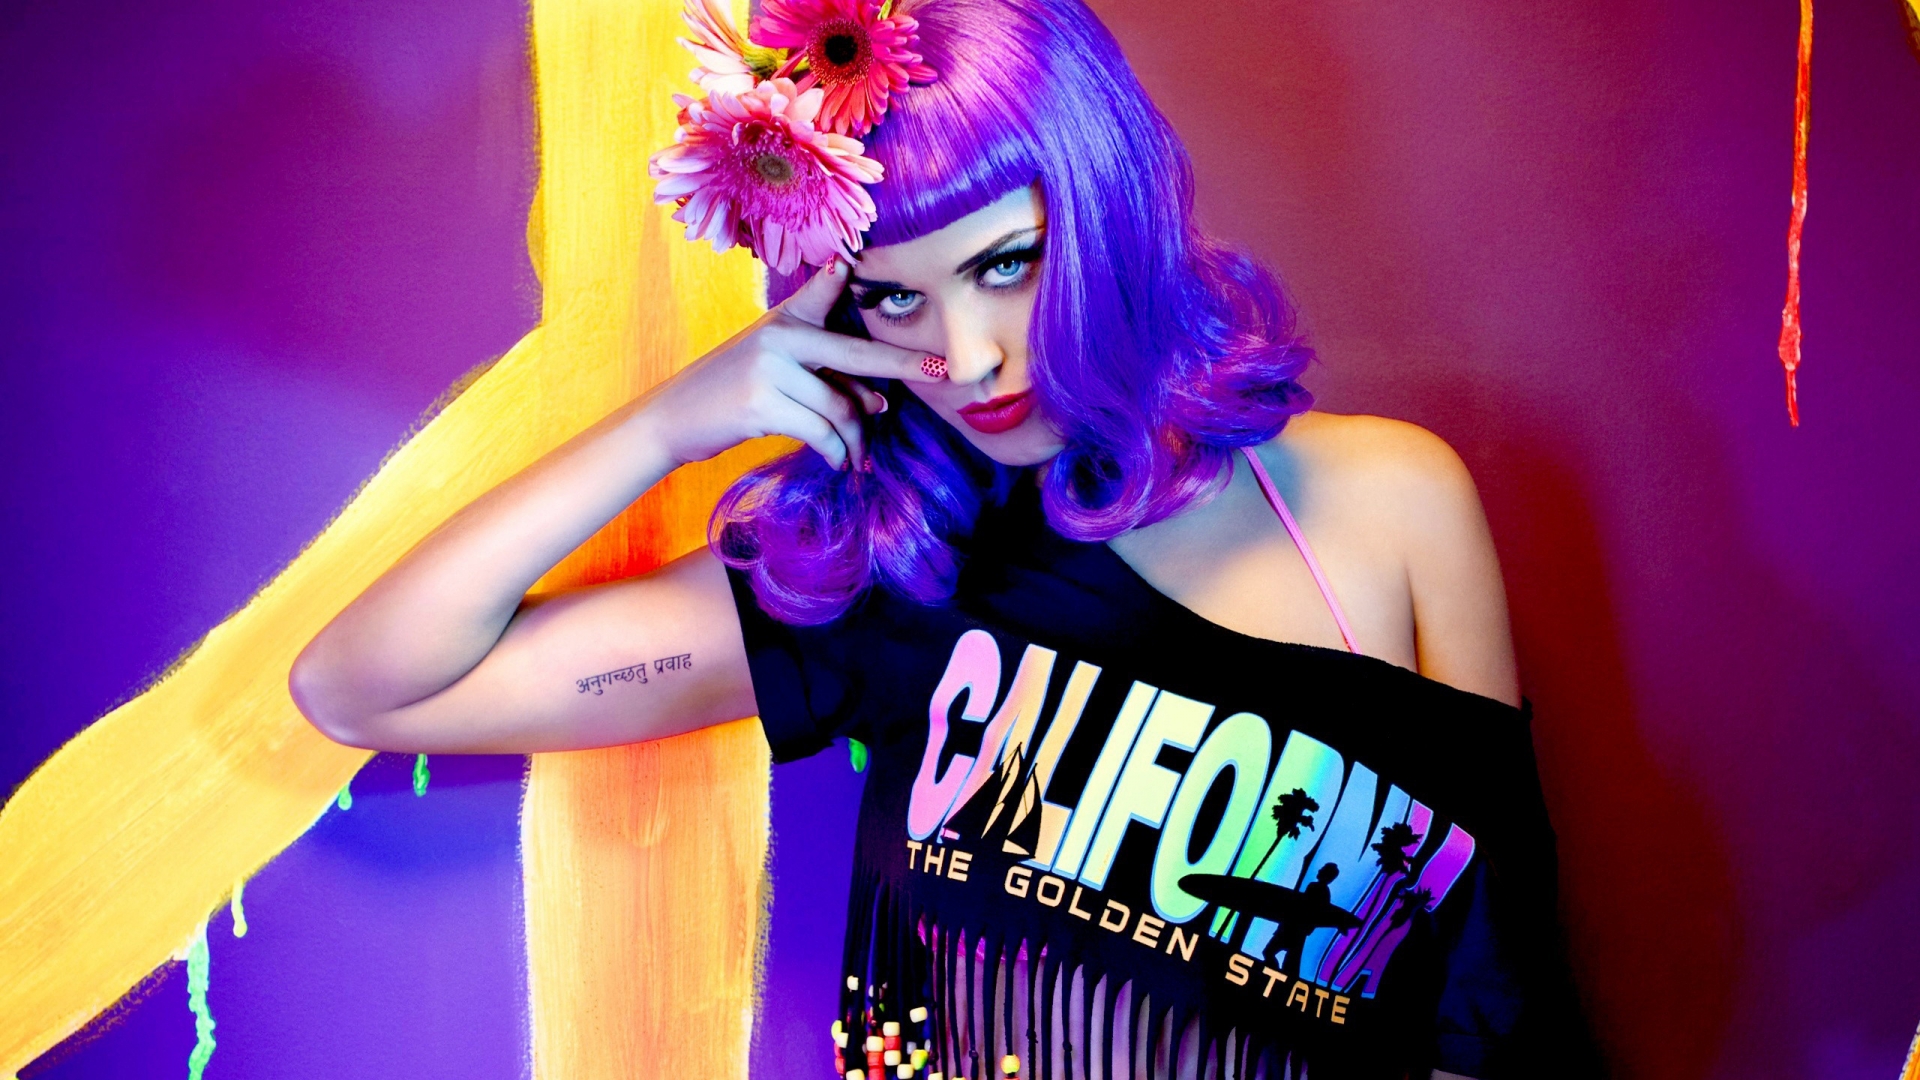 Katy Perry California for 1920 x 1080 HDTV 1080p resolution